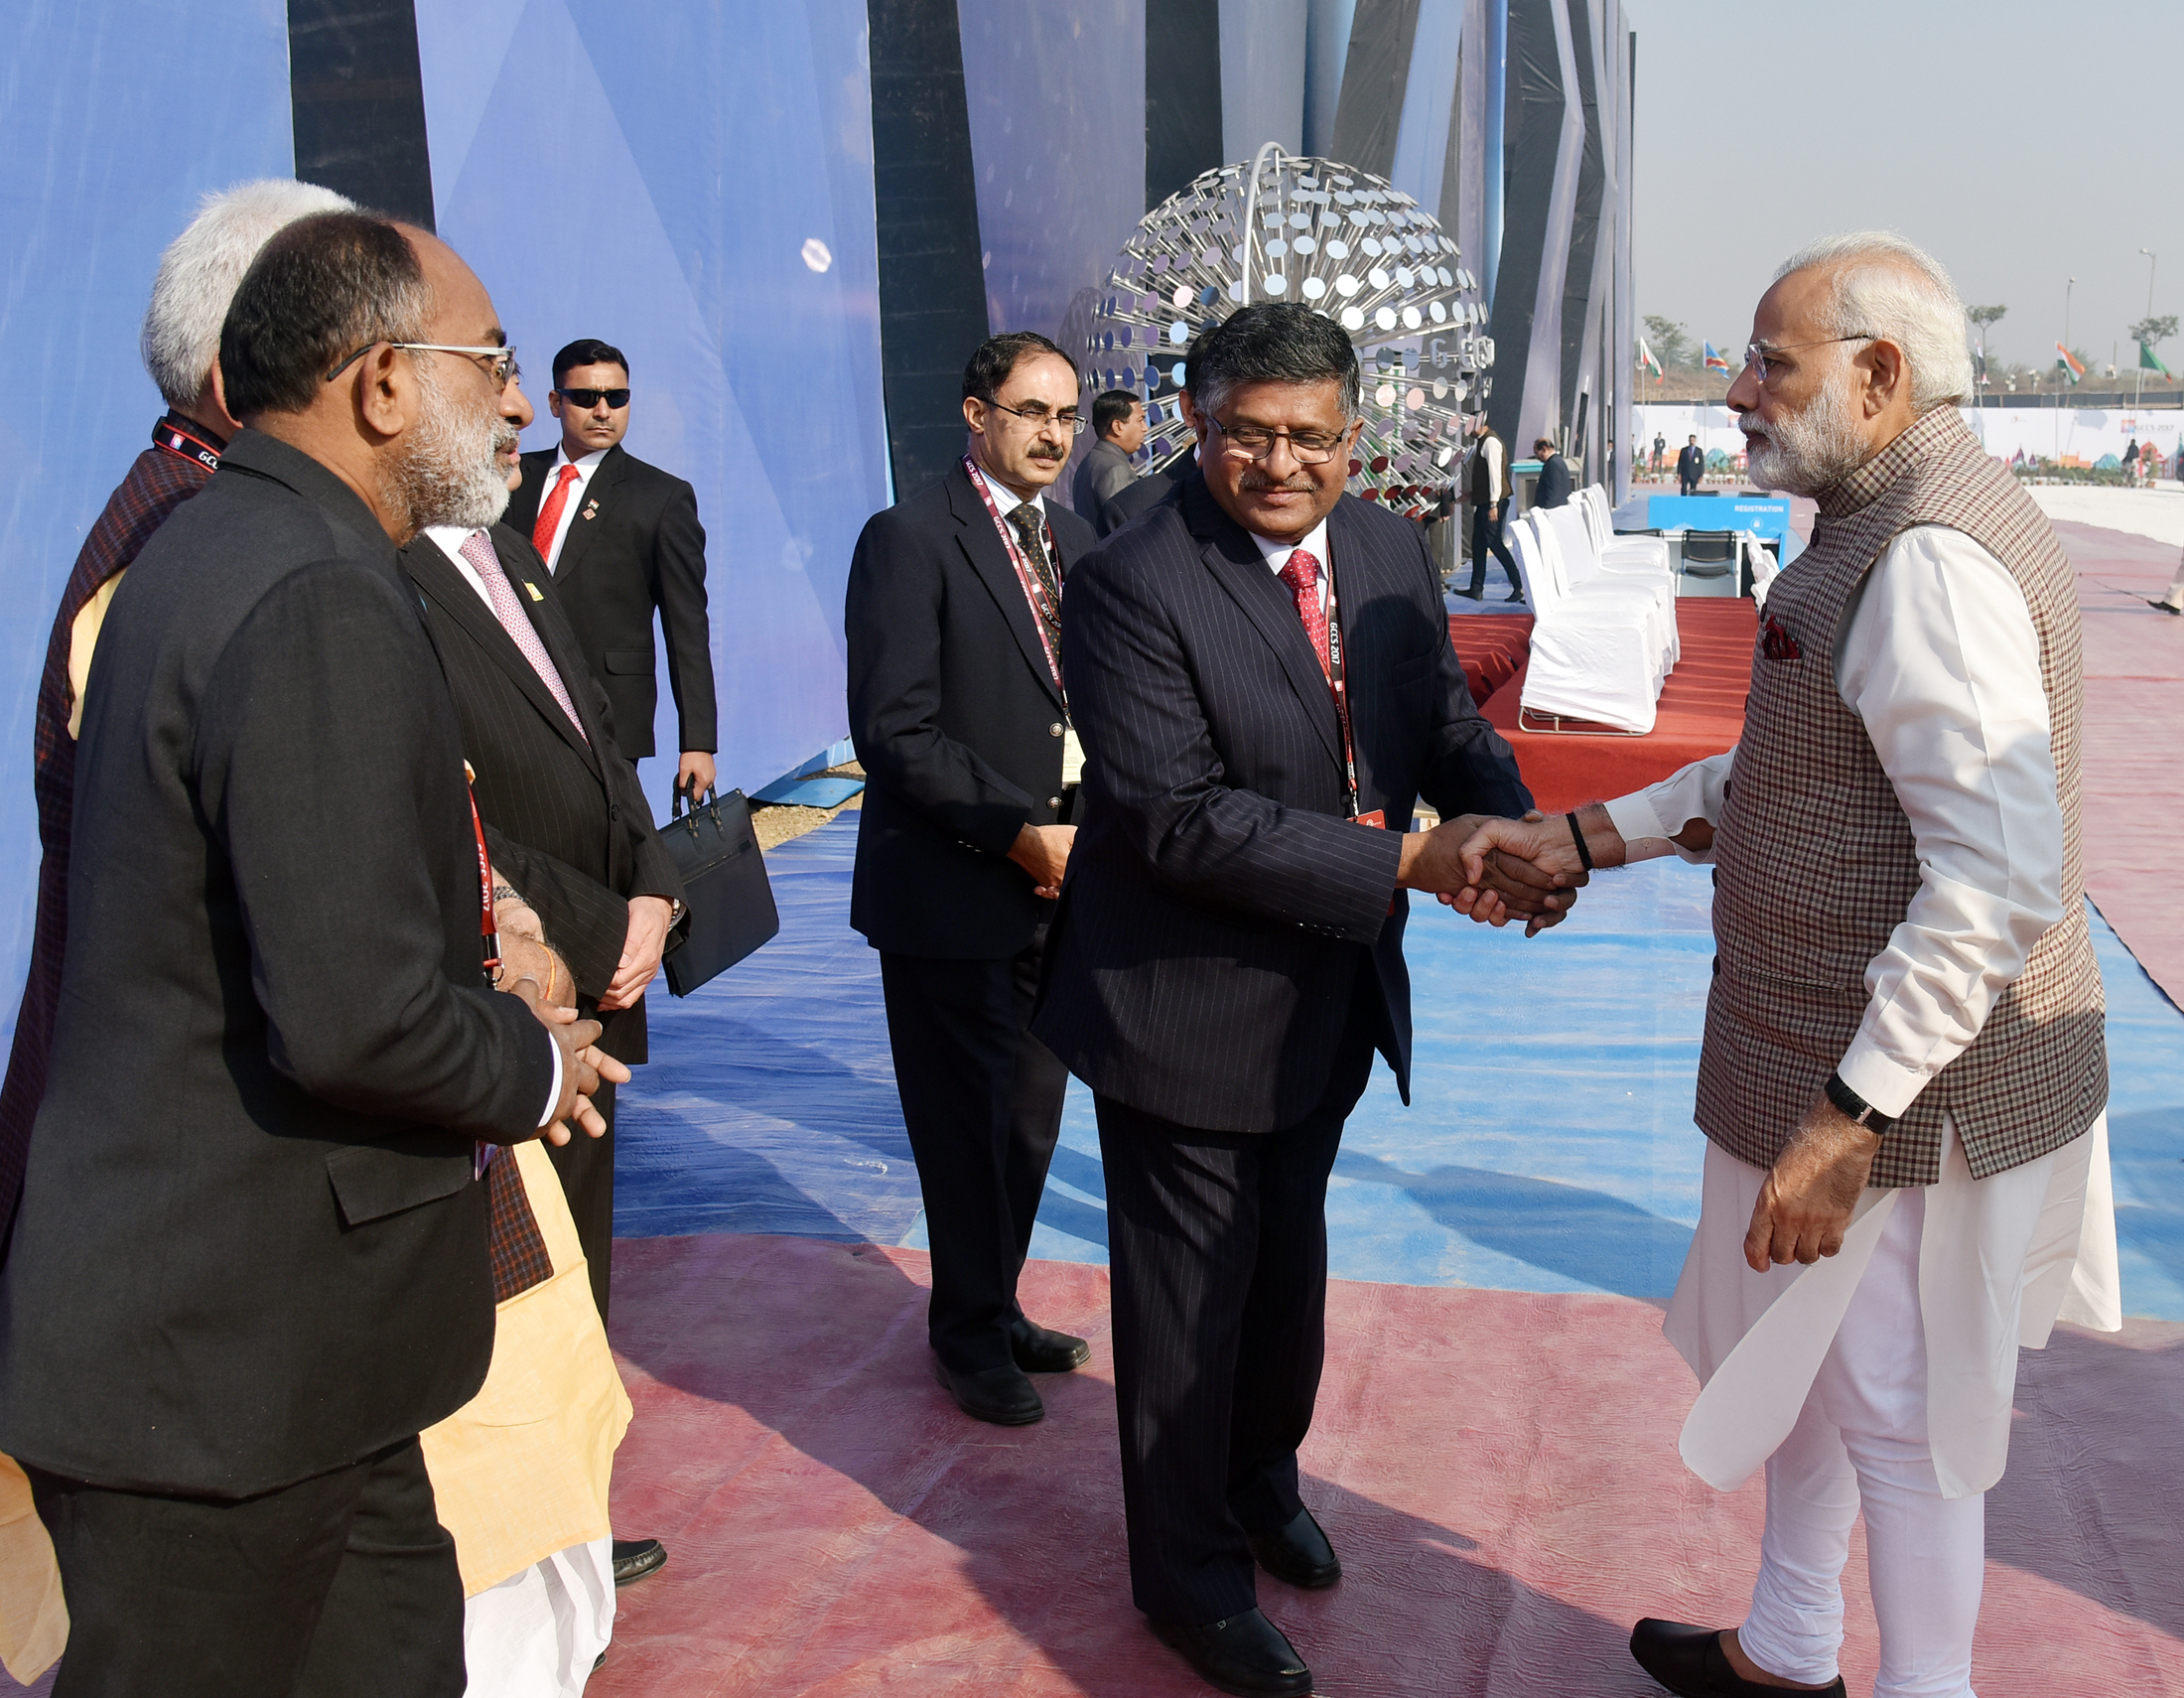 The Prime Minister, Shri Narendra Modi being welcomed by the Union Minister for Electronics & Information Technology and Law & Justice, Shri Ravi Shankar Prasad, on his arrival, at the 5th Global Conference on Cyber Space (GCCS2017), at Aerocity, in New Delhi on November 23, 2017. 